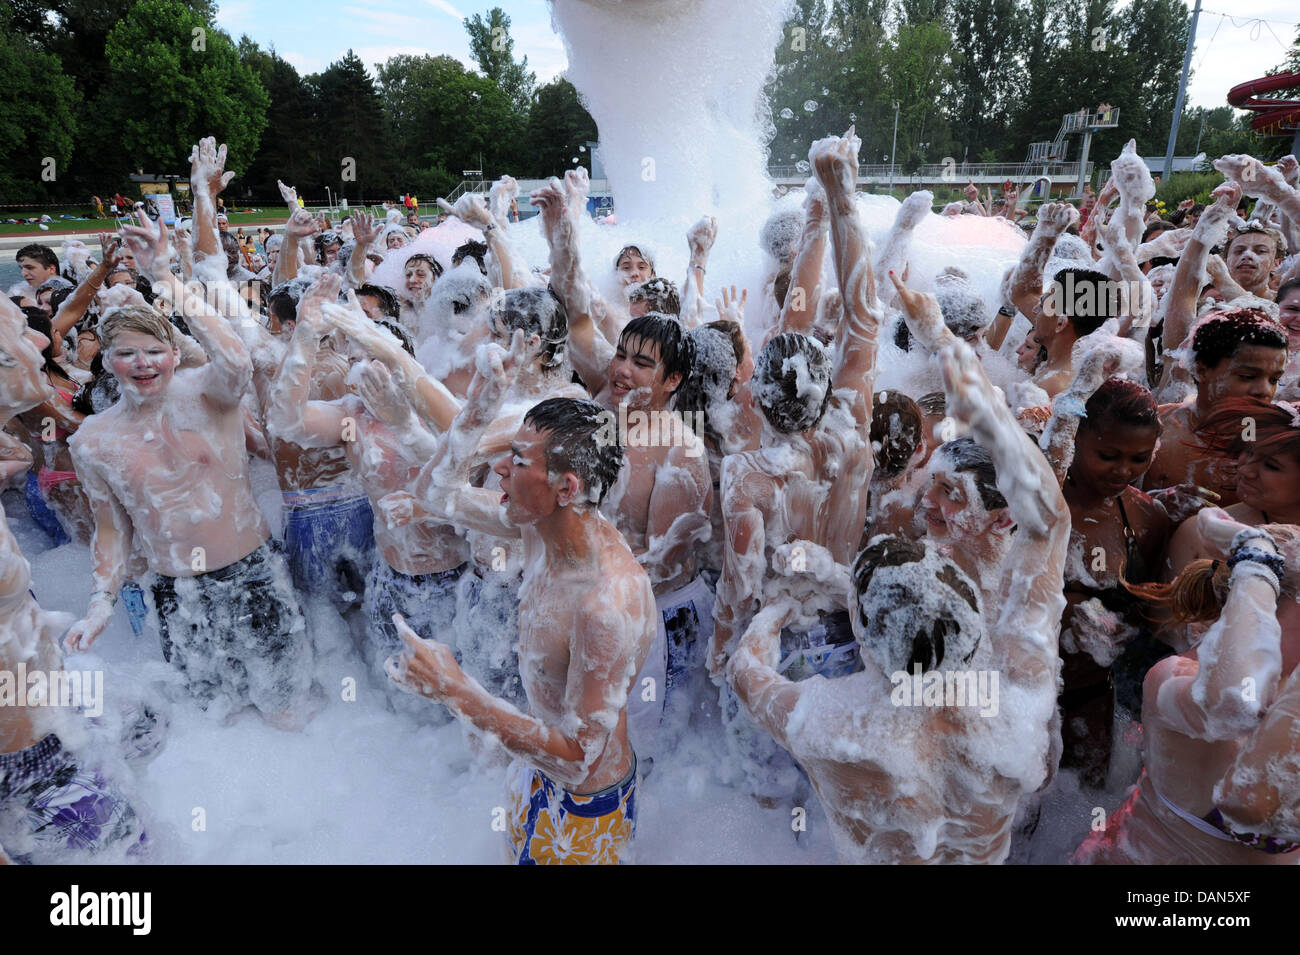 A foam party takes place at the public pool Rheinstrandbad Rappenwoert  during midsummer swimming in Karlsruhe, Germany, 08 July 2011. The public  pool operators were afraid that 6,000 people would come instead